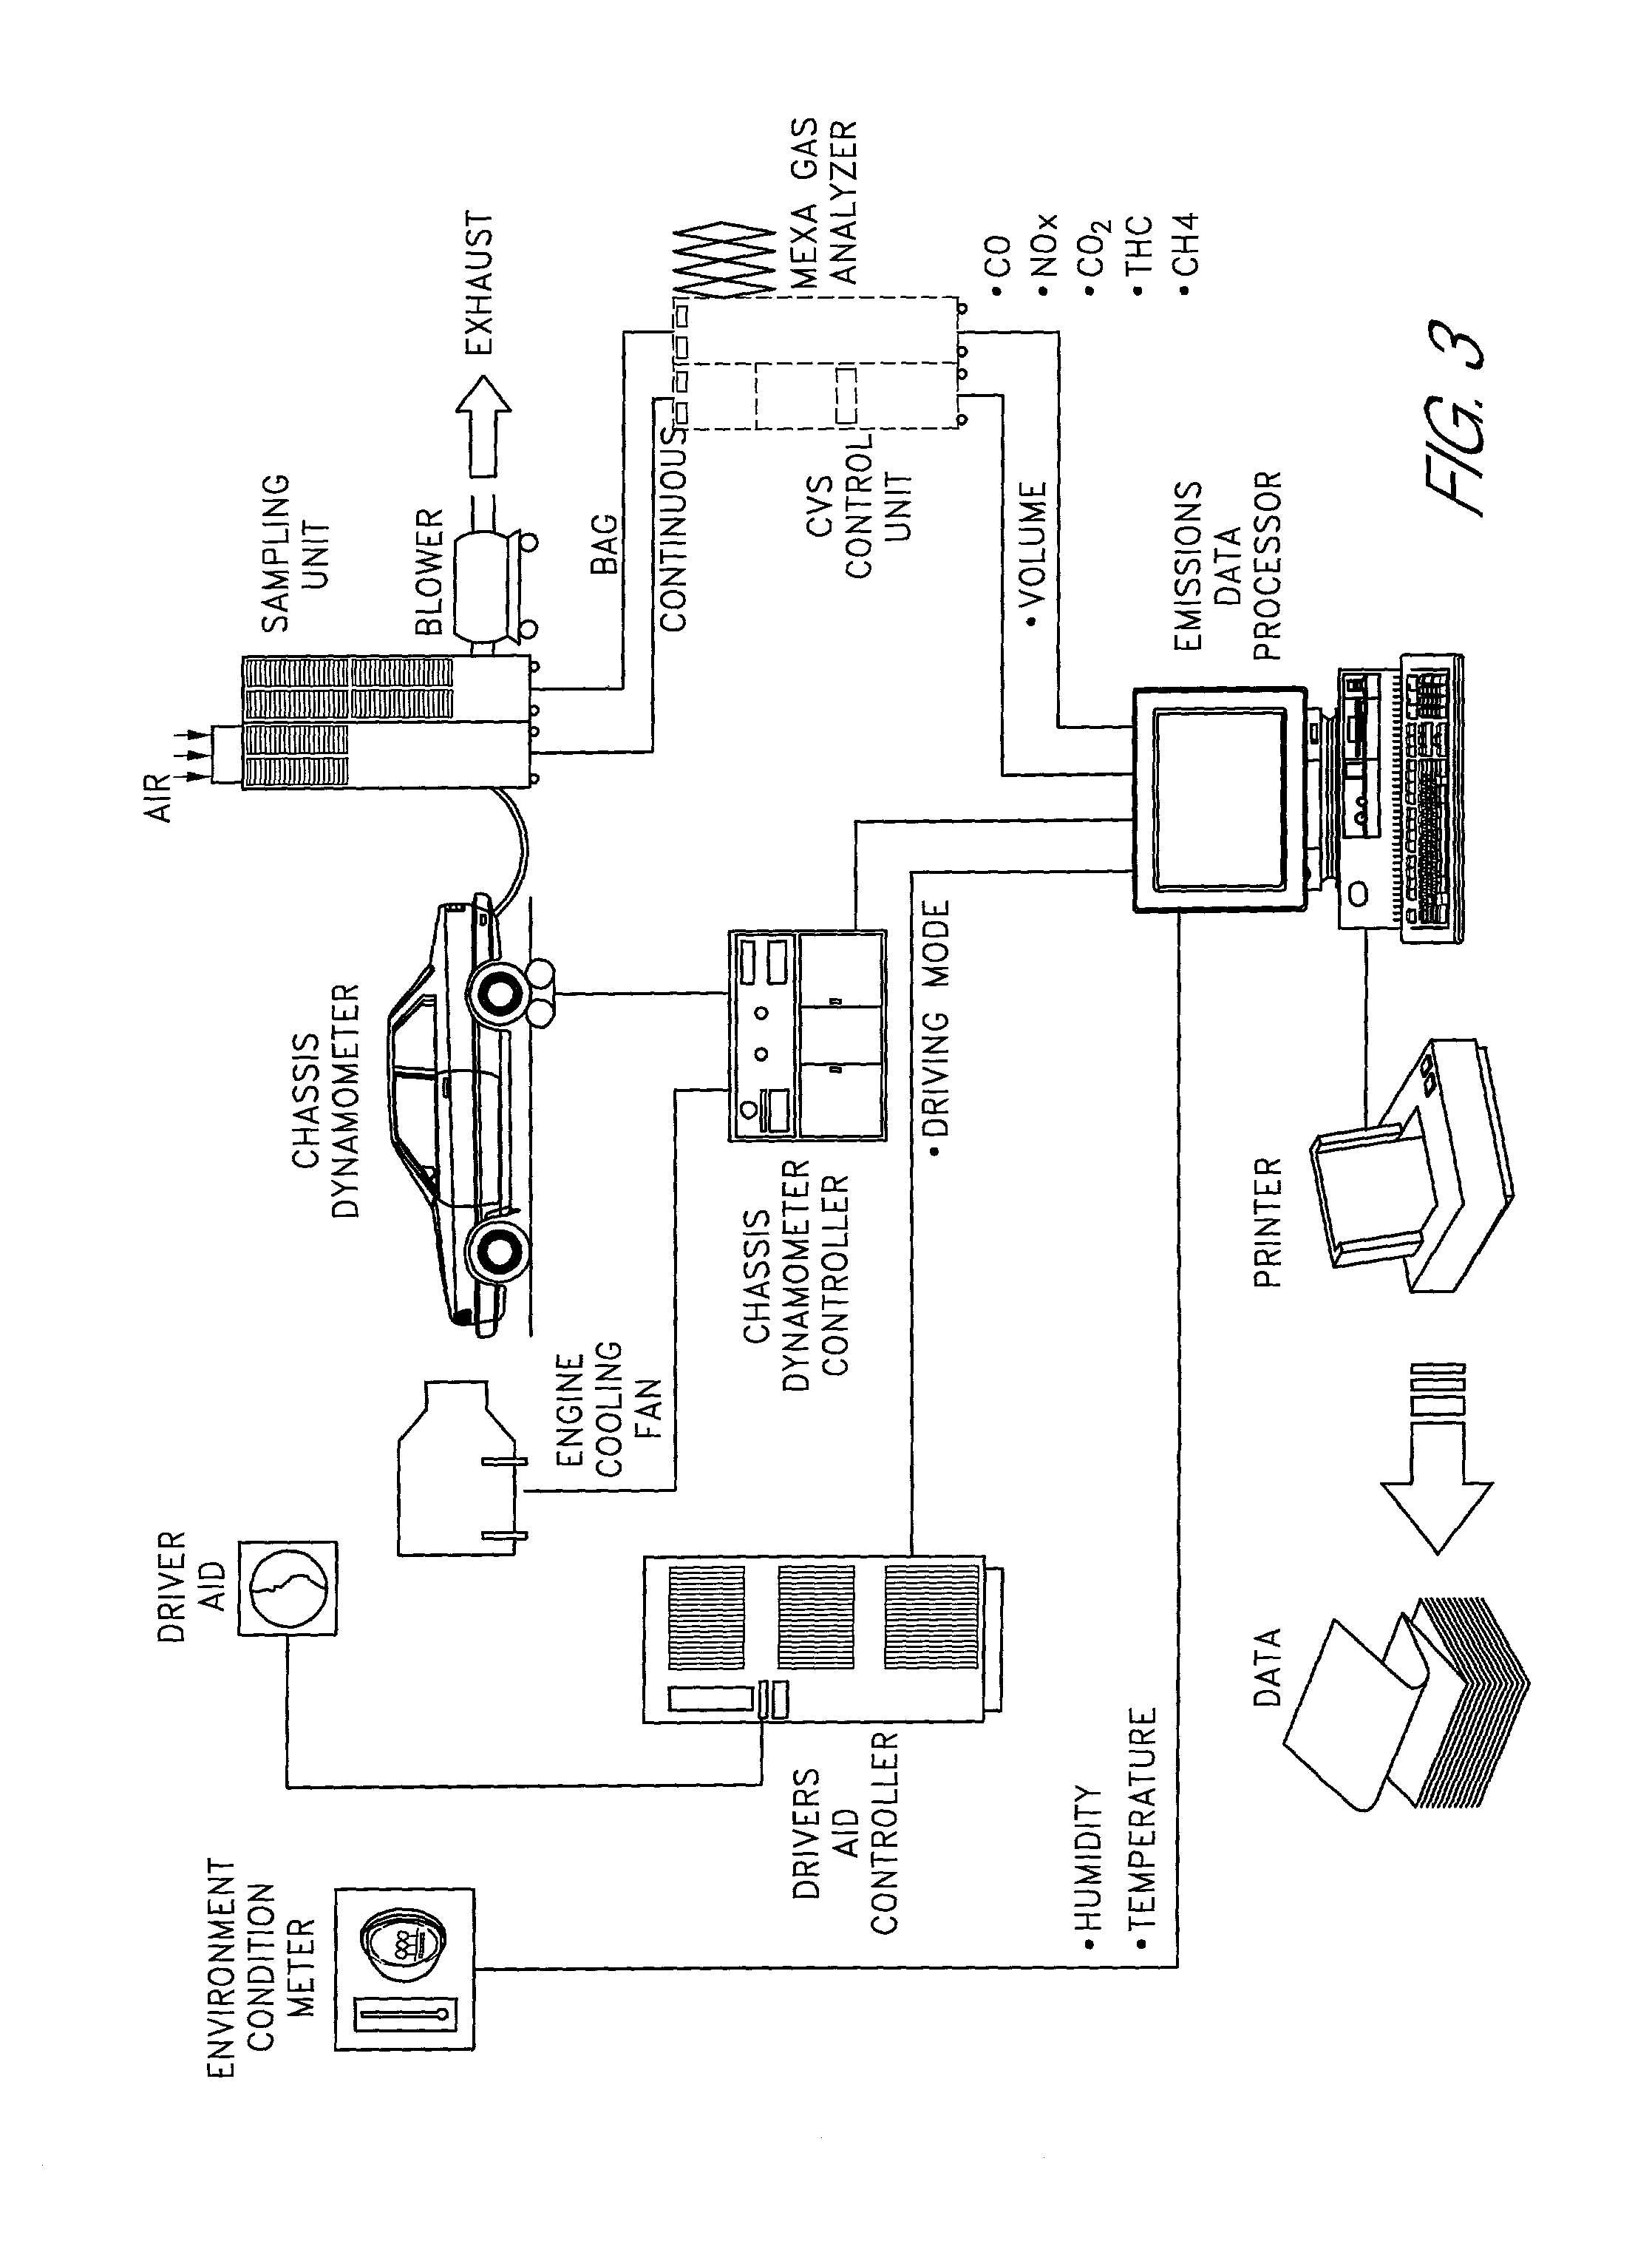 Method and composition for using organic, plant-derived, oil-extracted materials in fossil fuels for reduced emissions